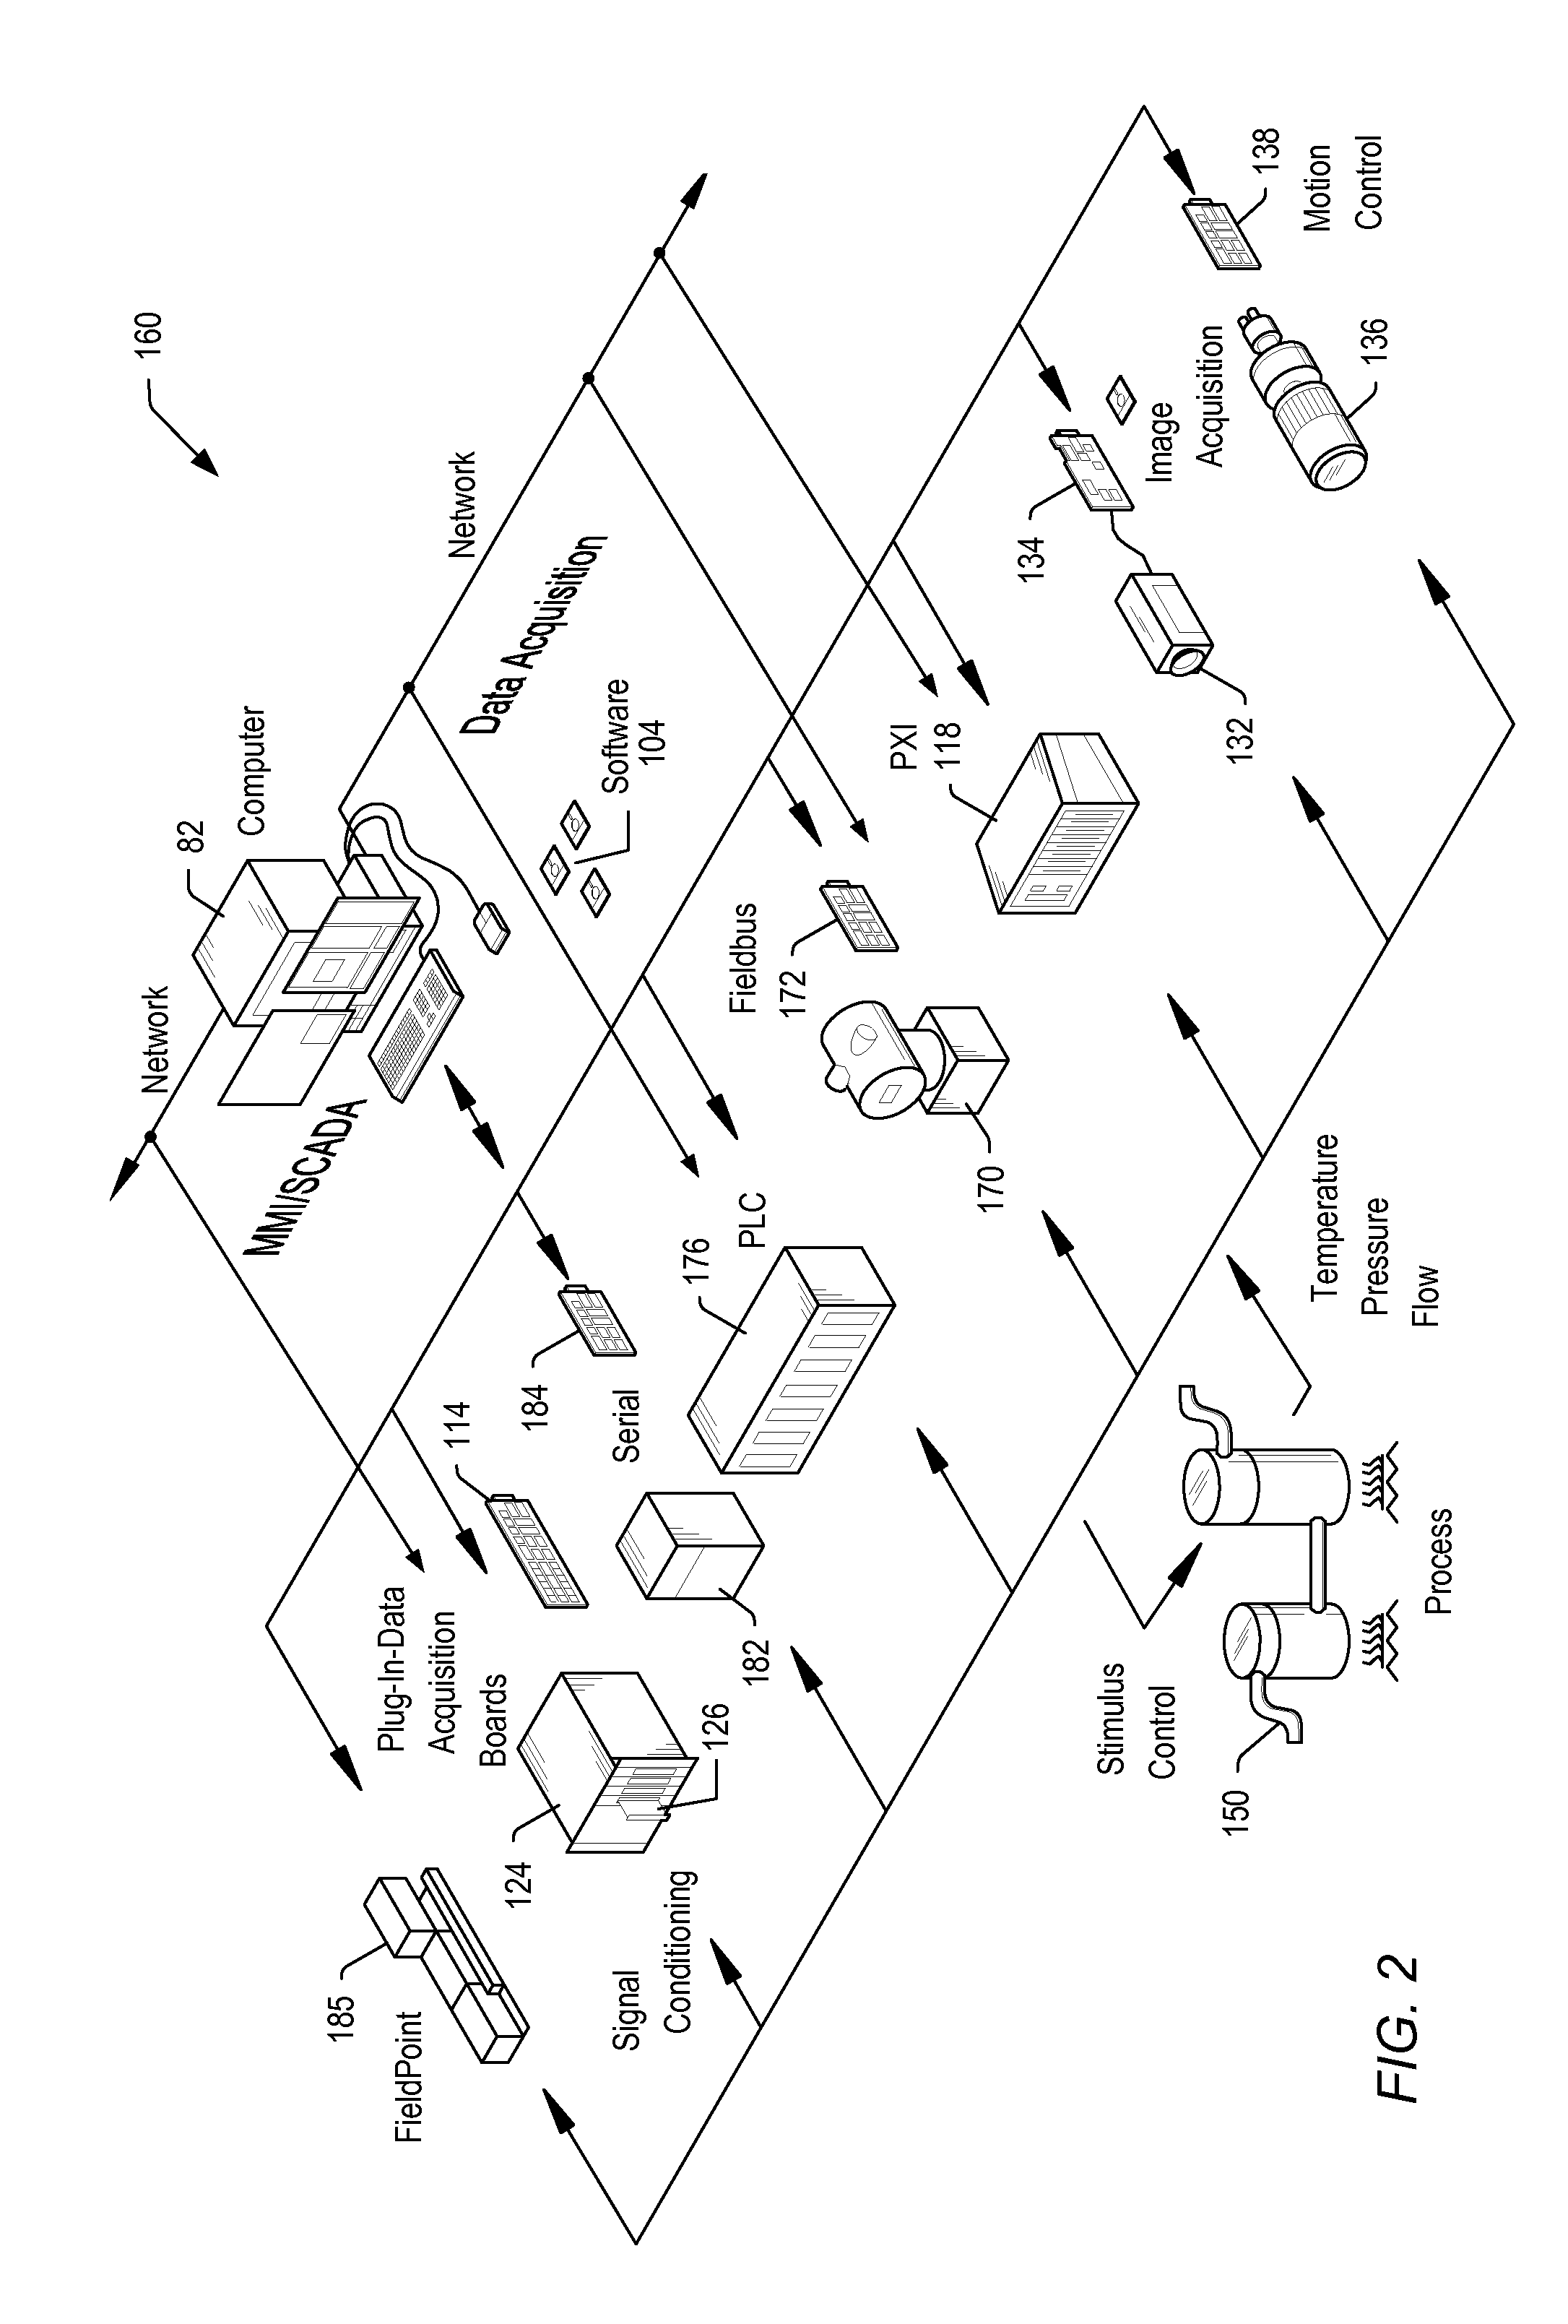 Packet Routing Based on Packet Type in Peripheral Component Interconnect Express Bus Systems